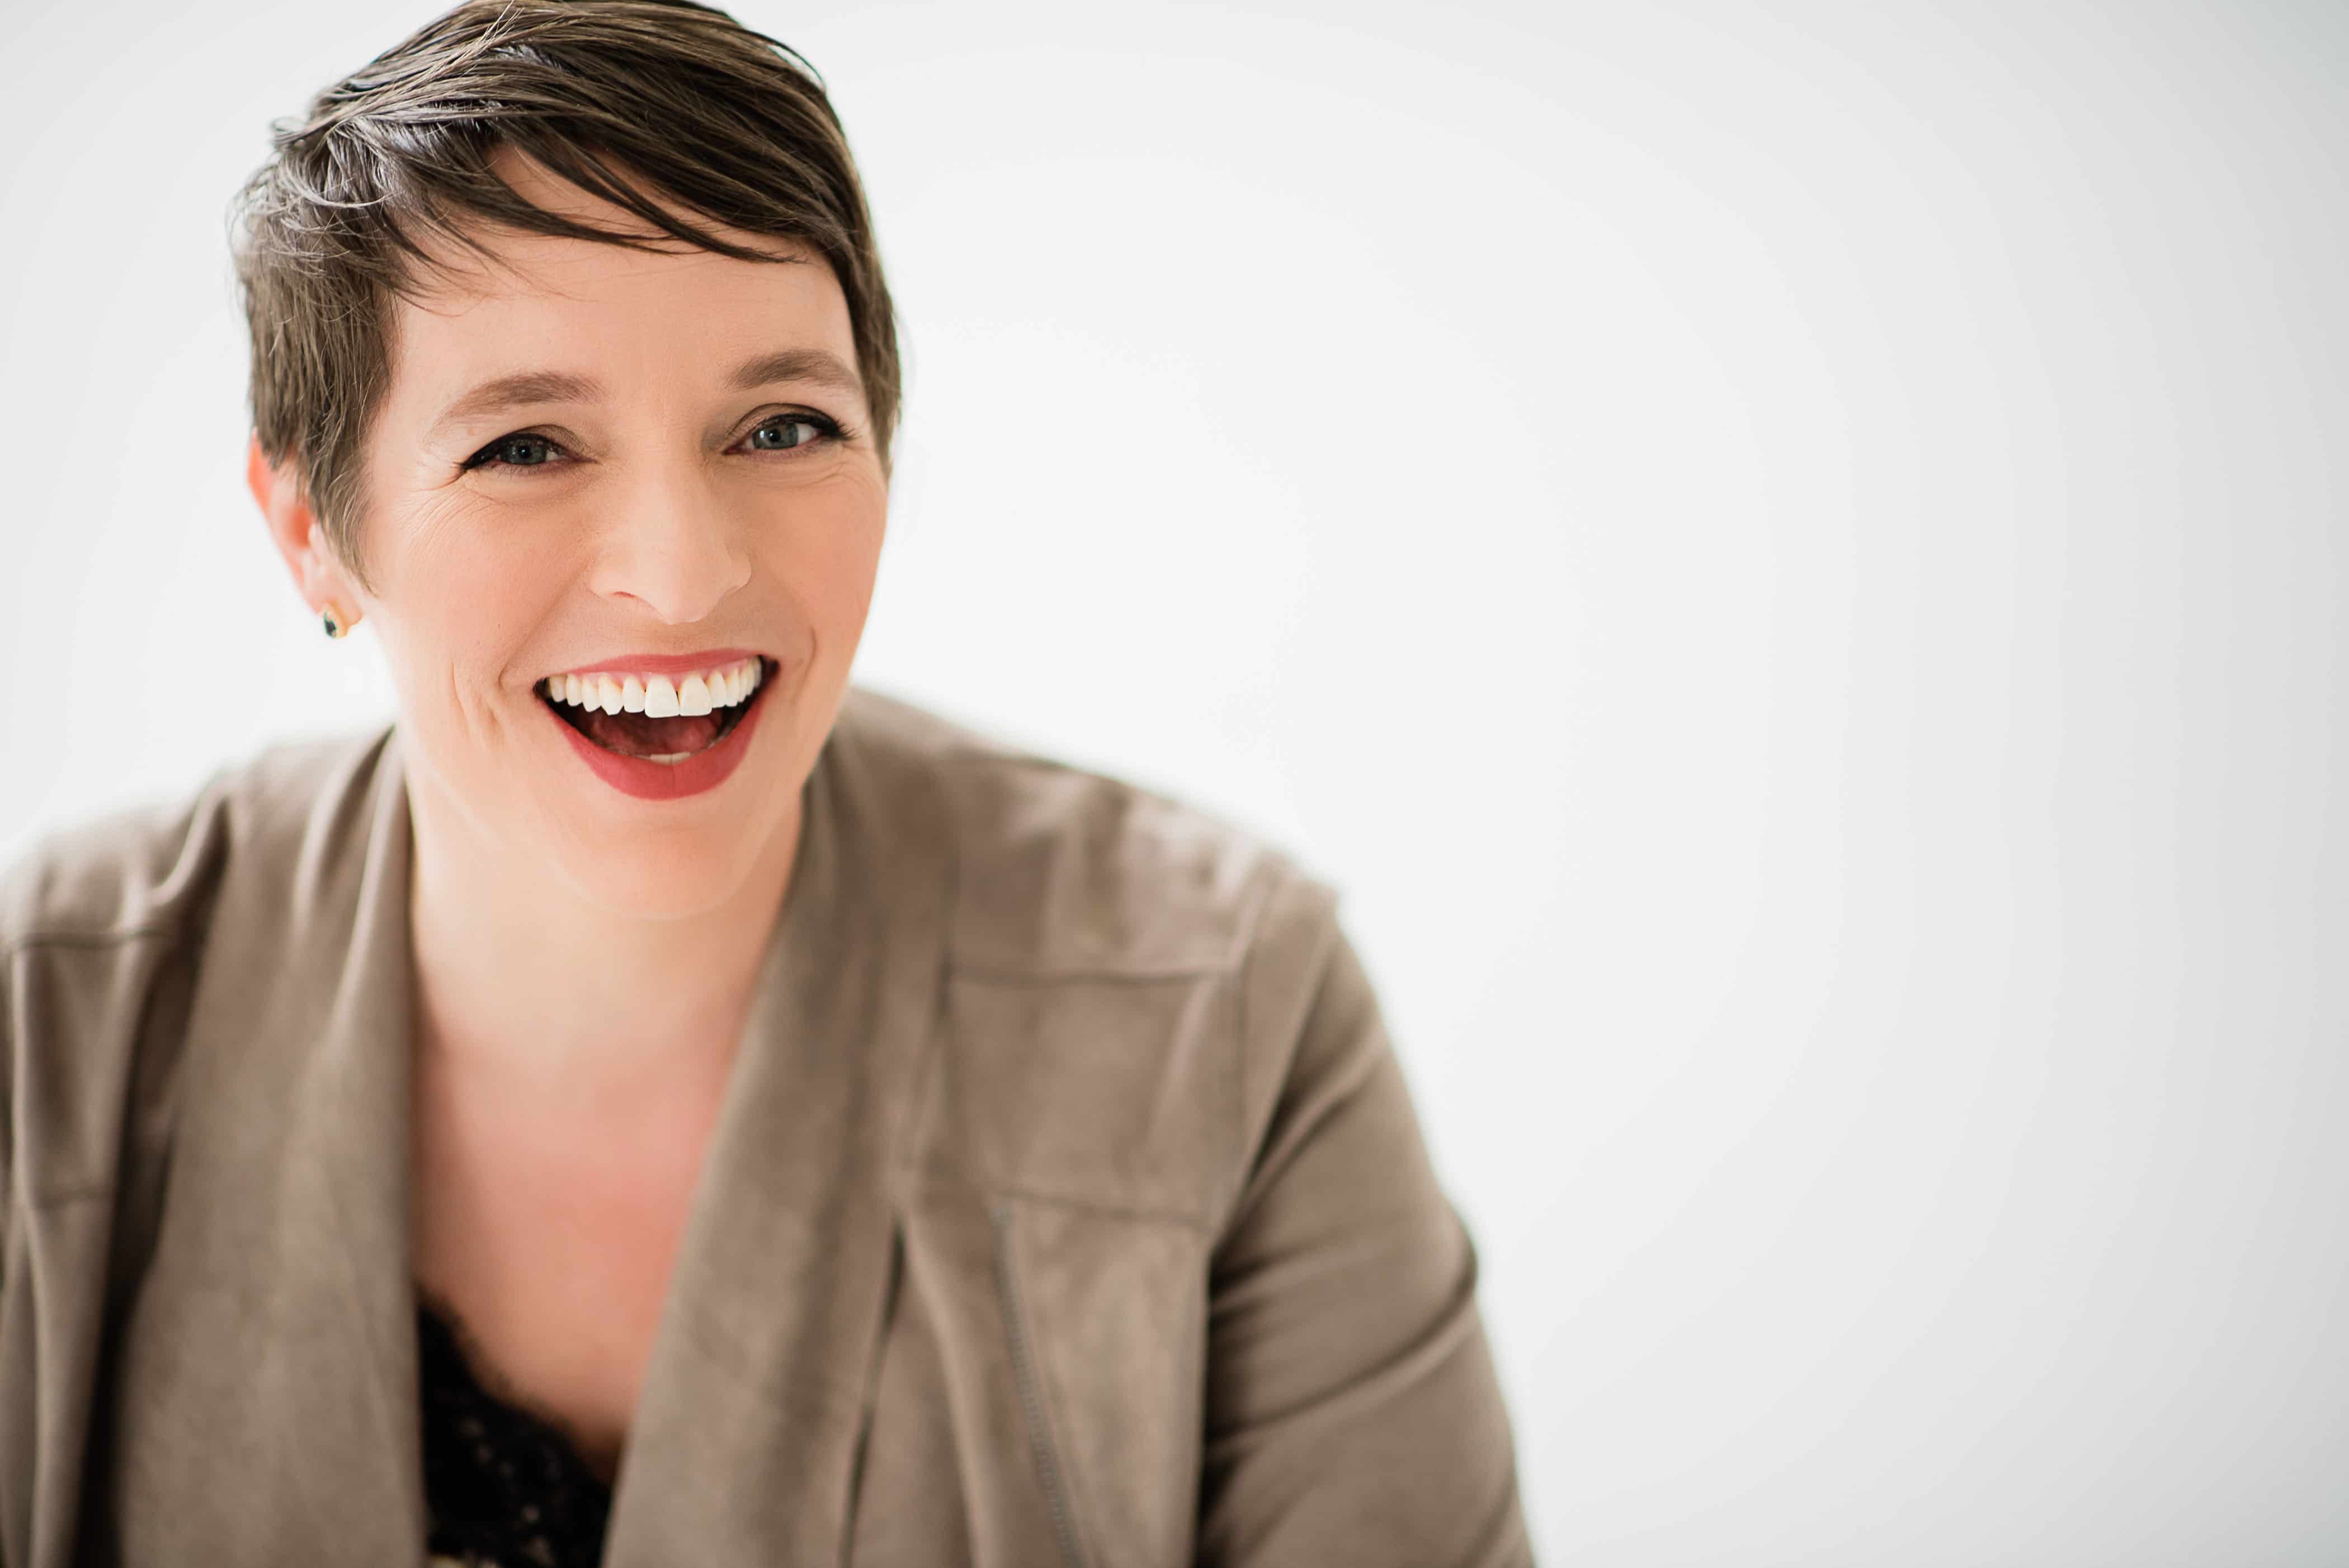 woman laughing in front of a white backdrop.